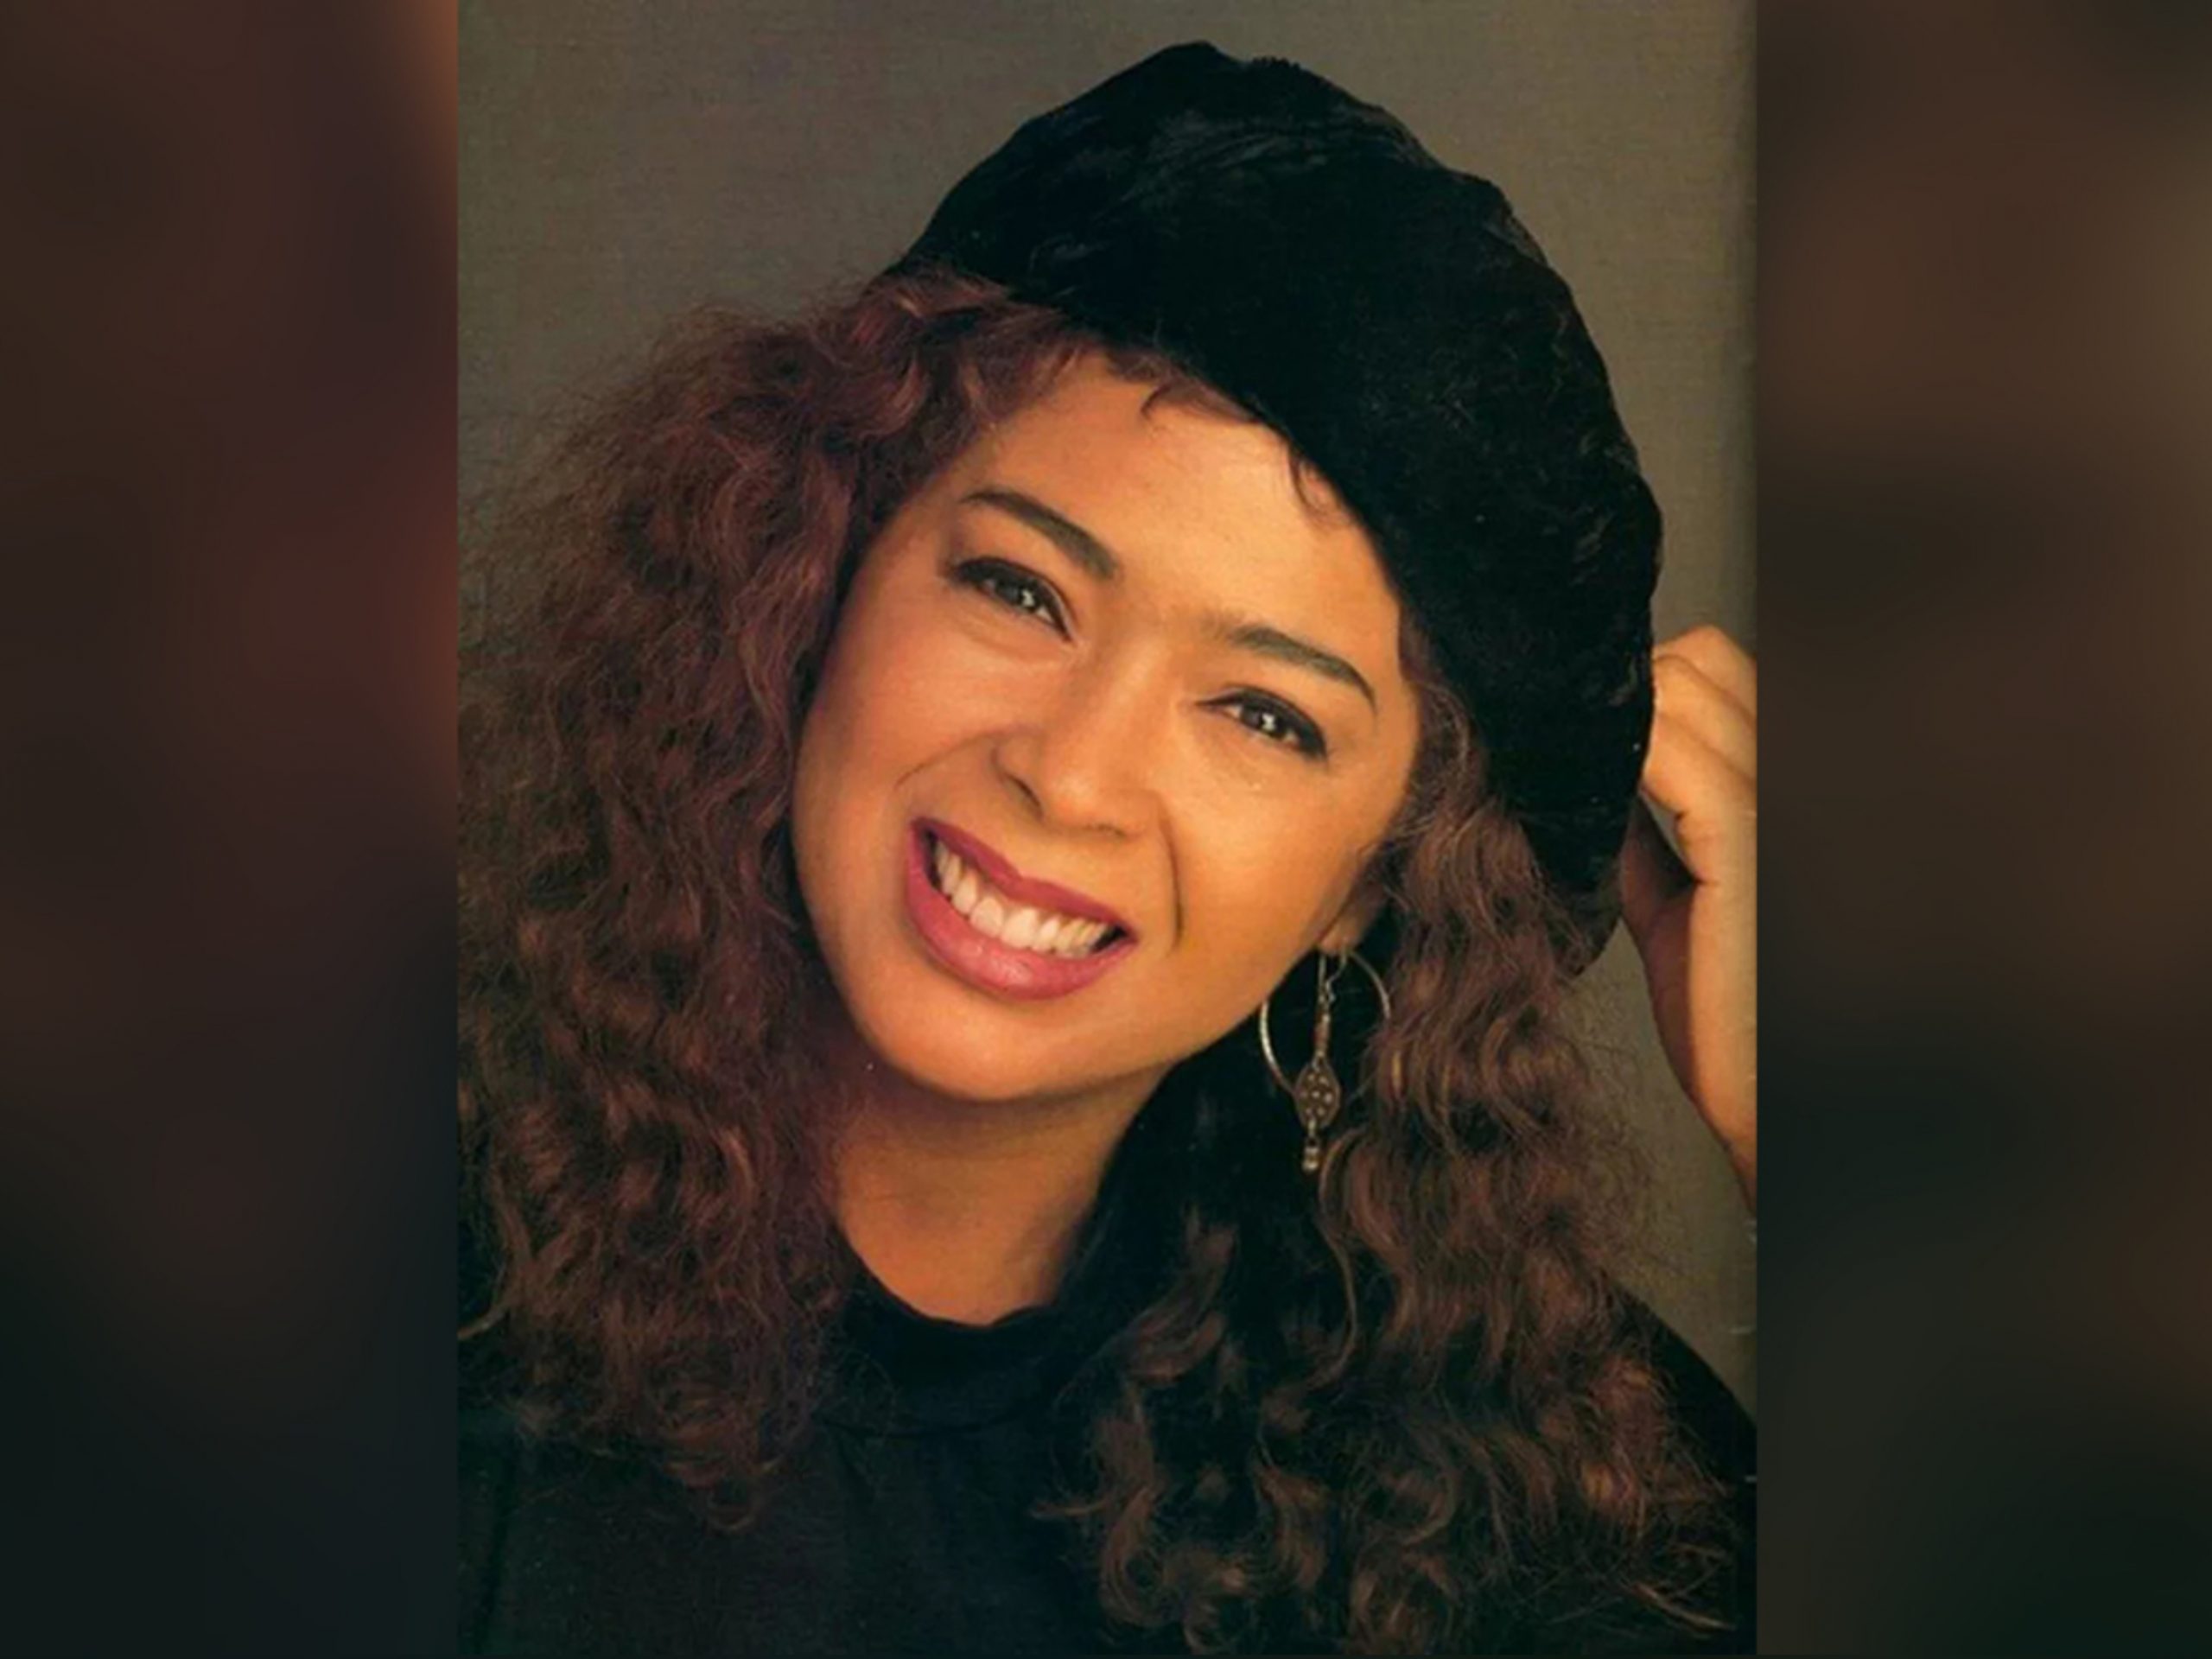 Irene Cara, ‘Flame’ Star and ‘Flashdance’ Singer, Passed Away At 63